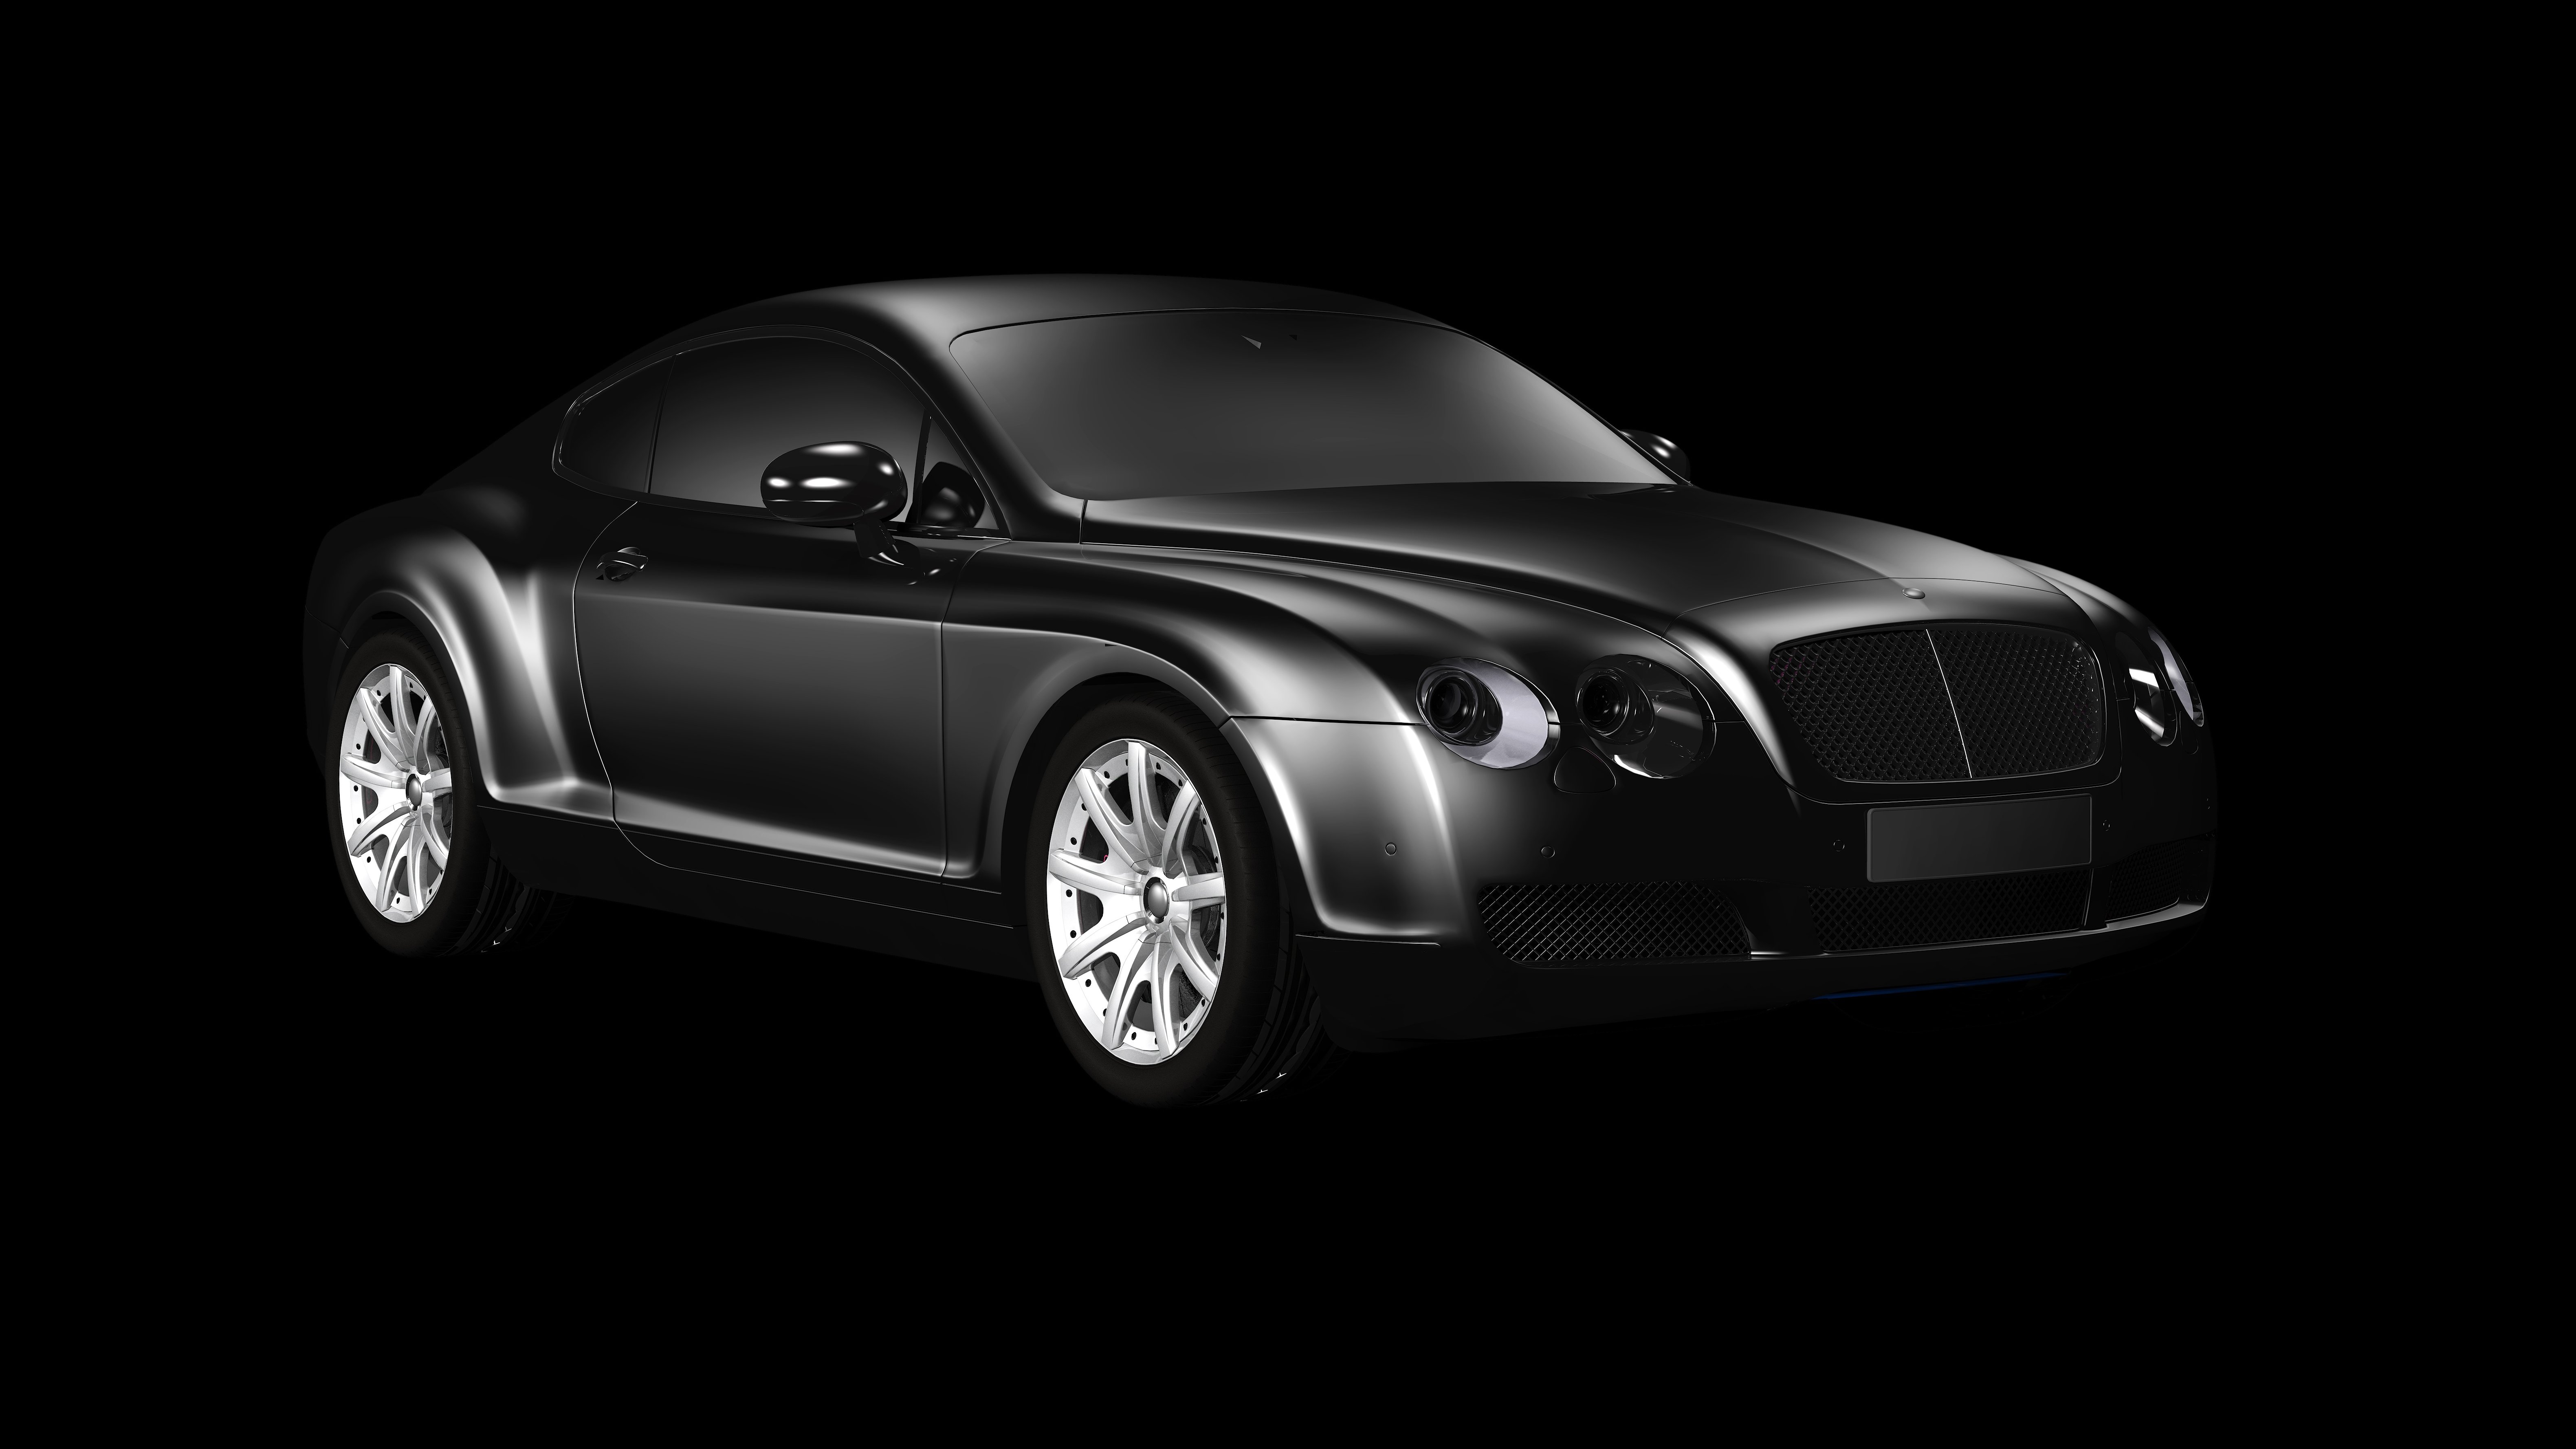 141821 Screensavers and Wallpapers Bentley for phone. Download bentley, cars, grey, bw, chb, bentley continental gt, luxurious pictures for free